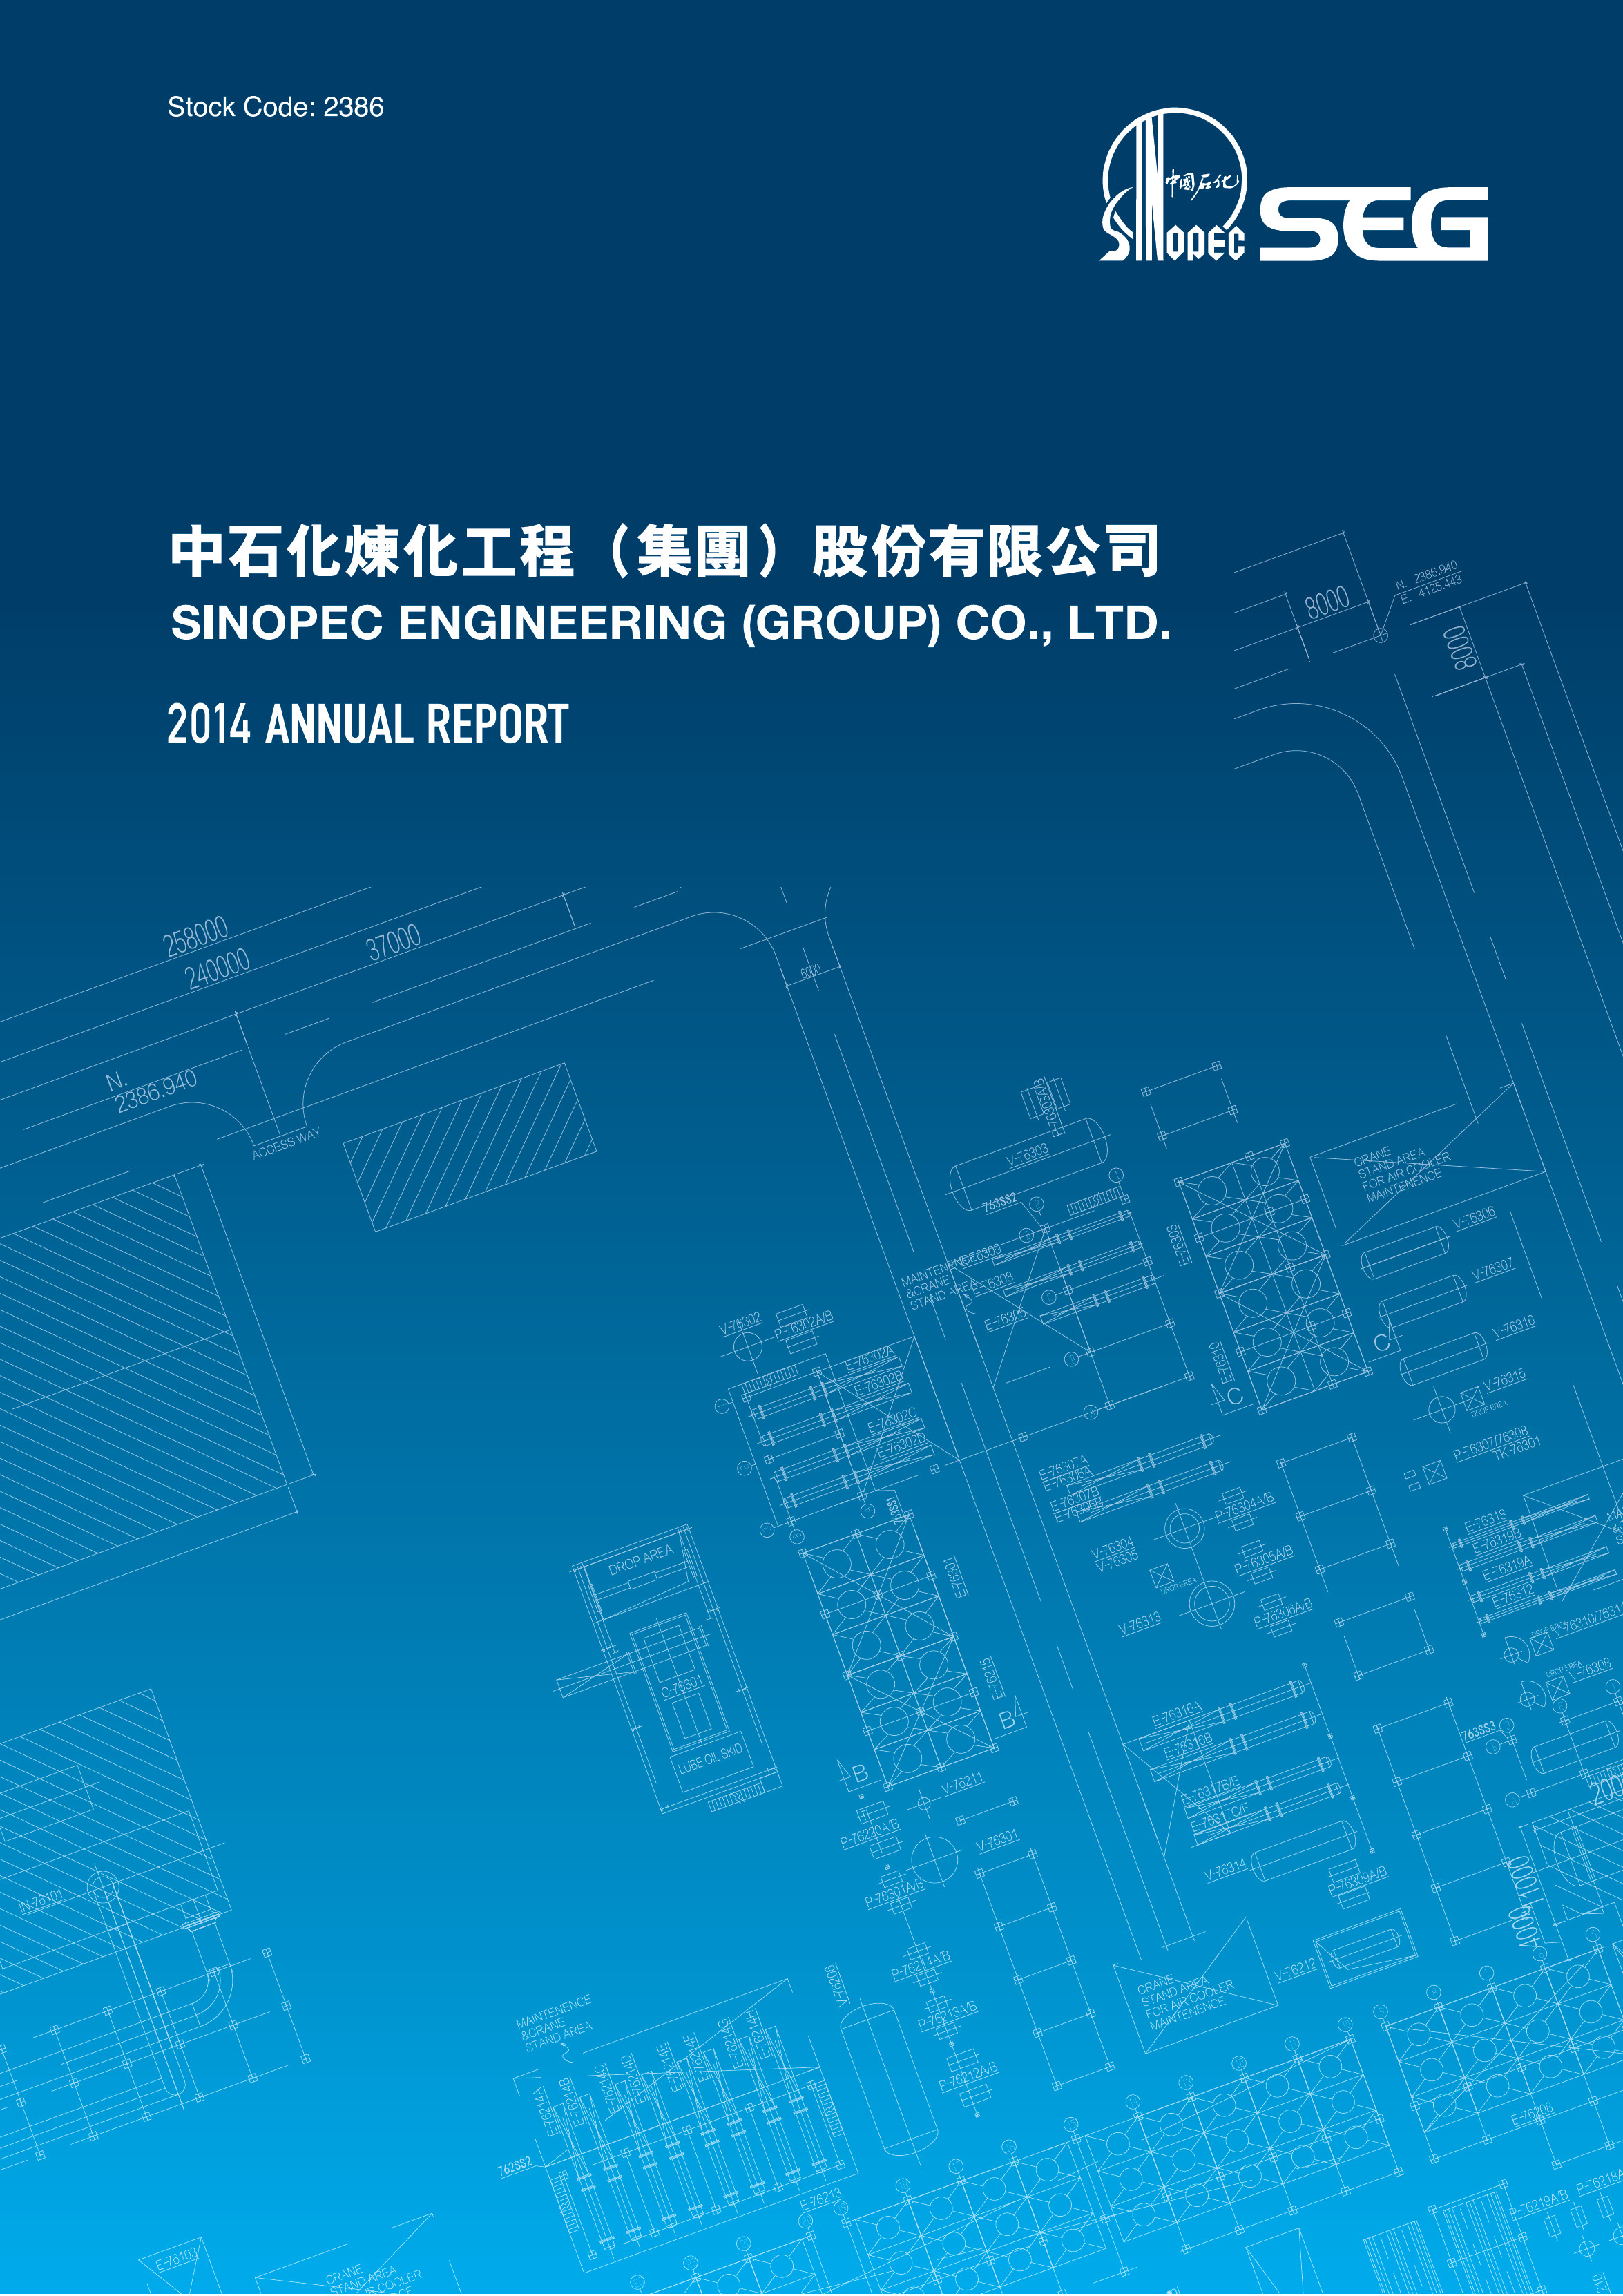 sinopec engineering group co ltd annual report 2014 page i of 189 nomura financial statements